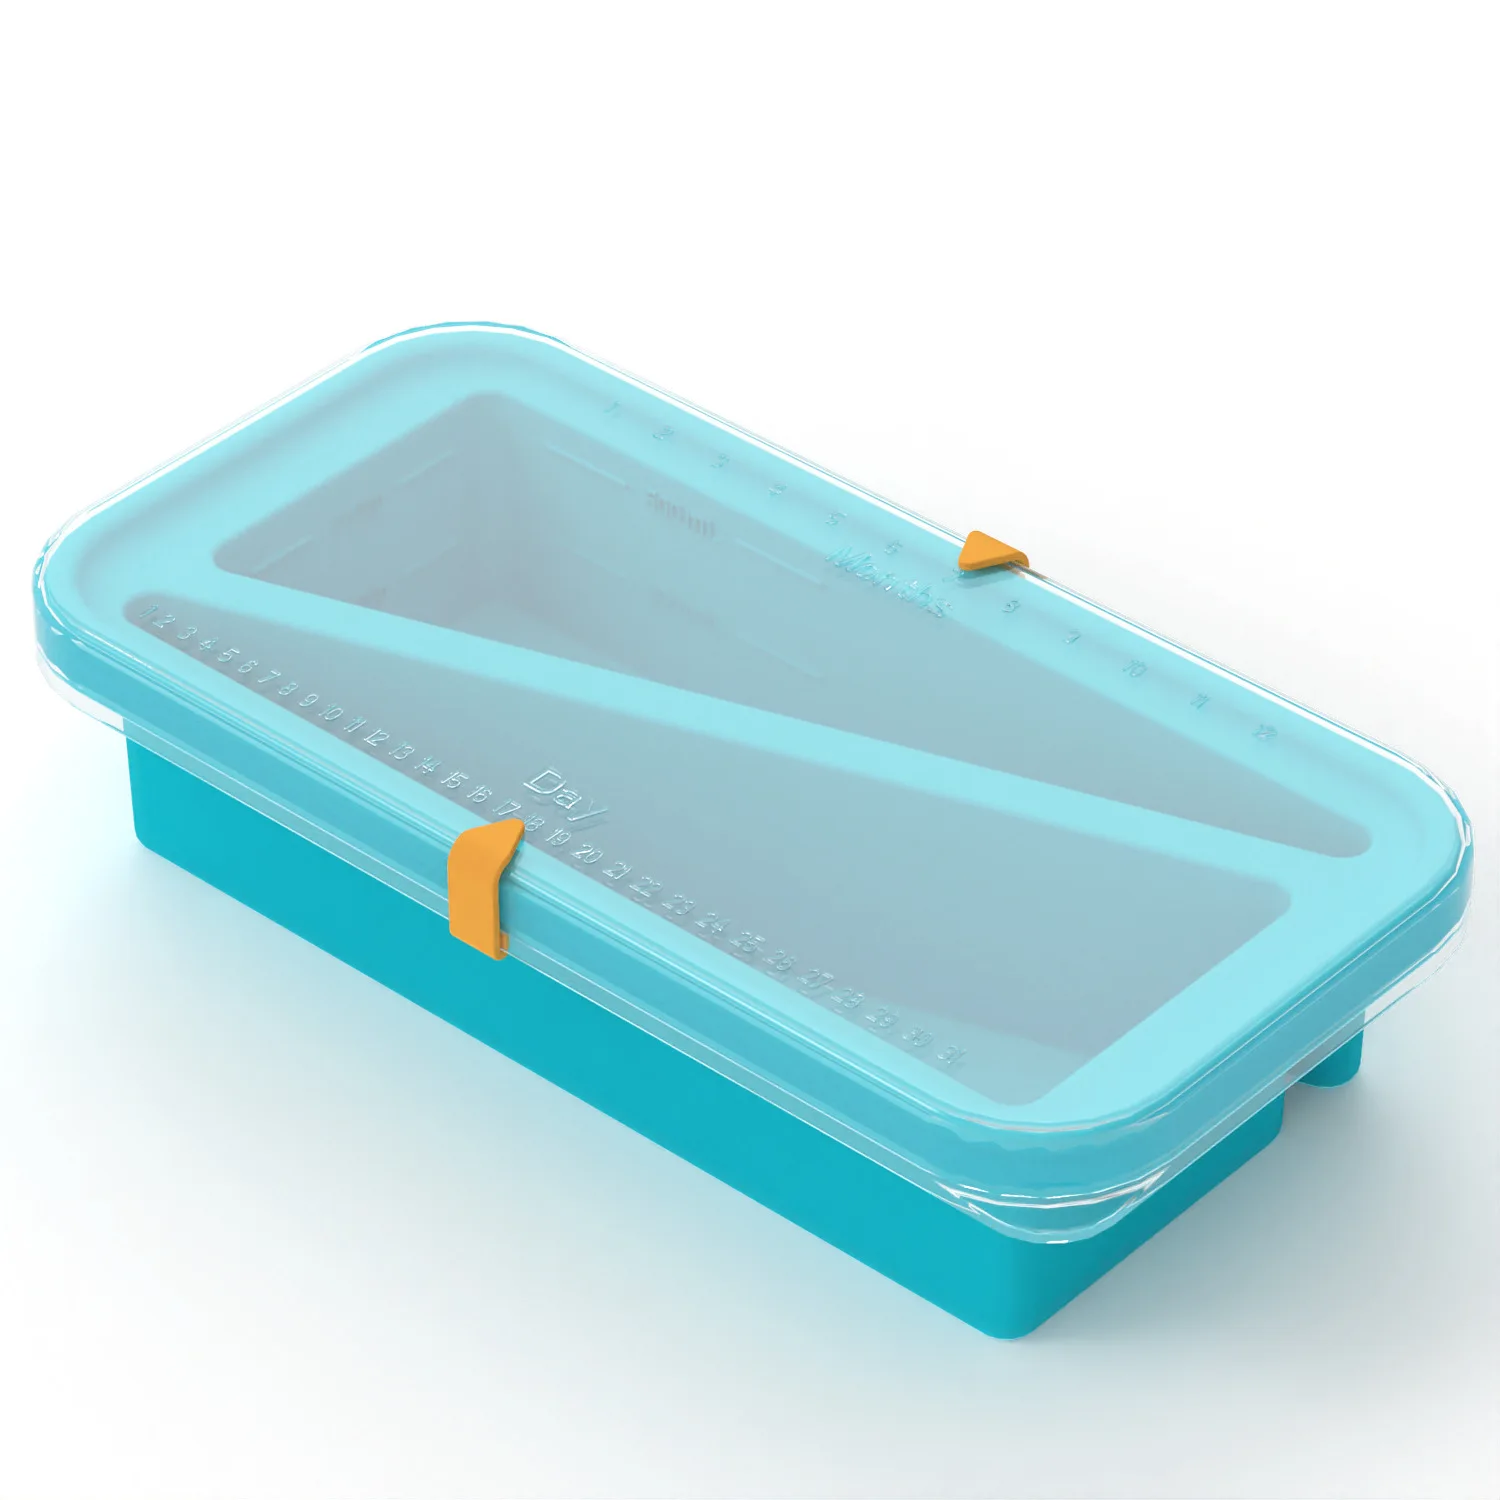 Lowest Price: XOMOO Silicone Freezer Tray With Lid-Soup